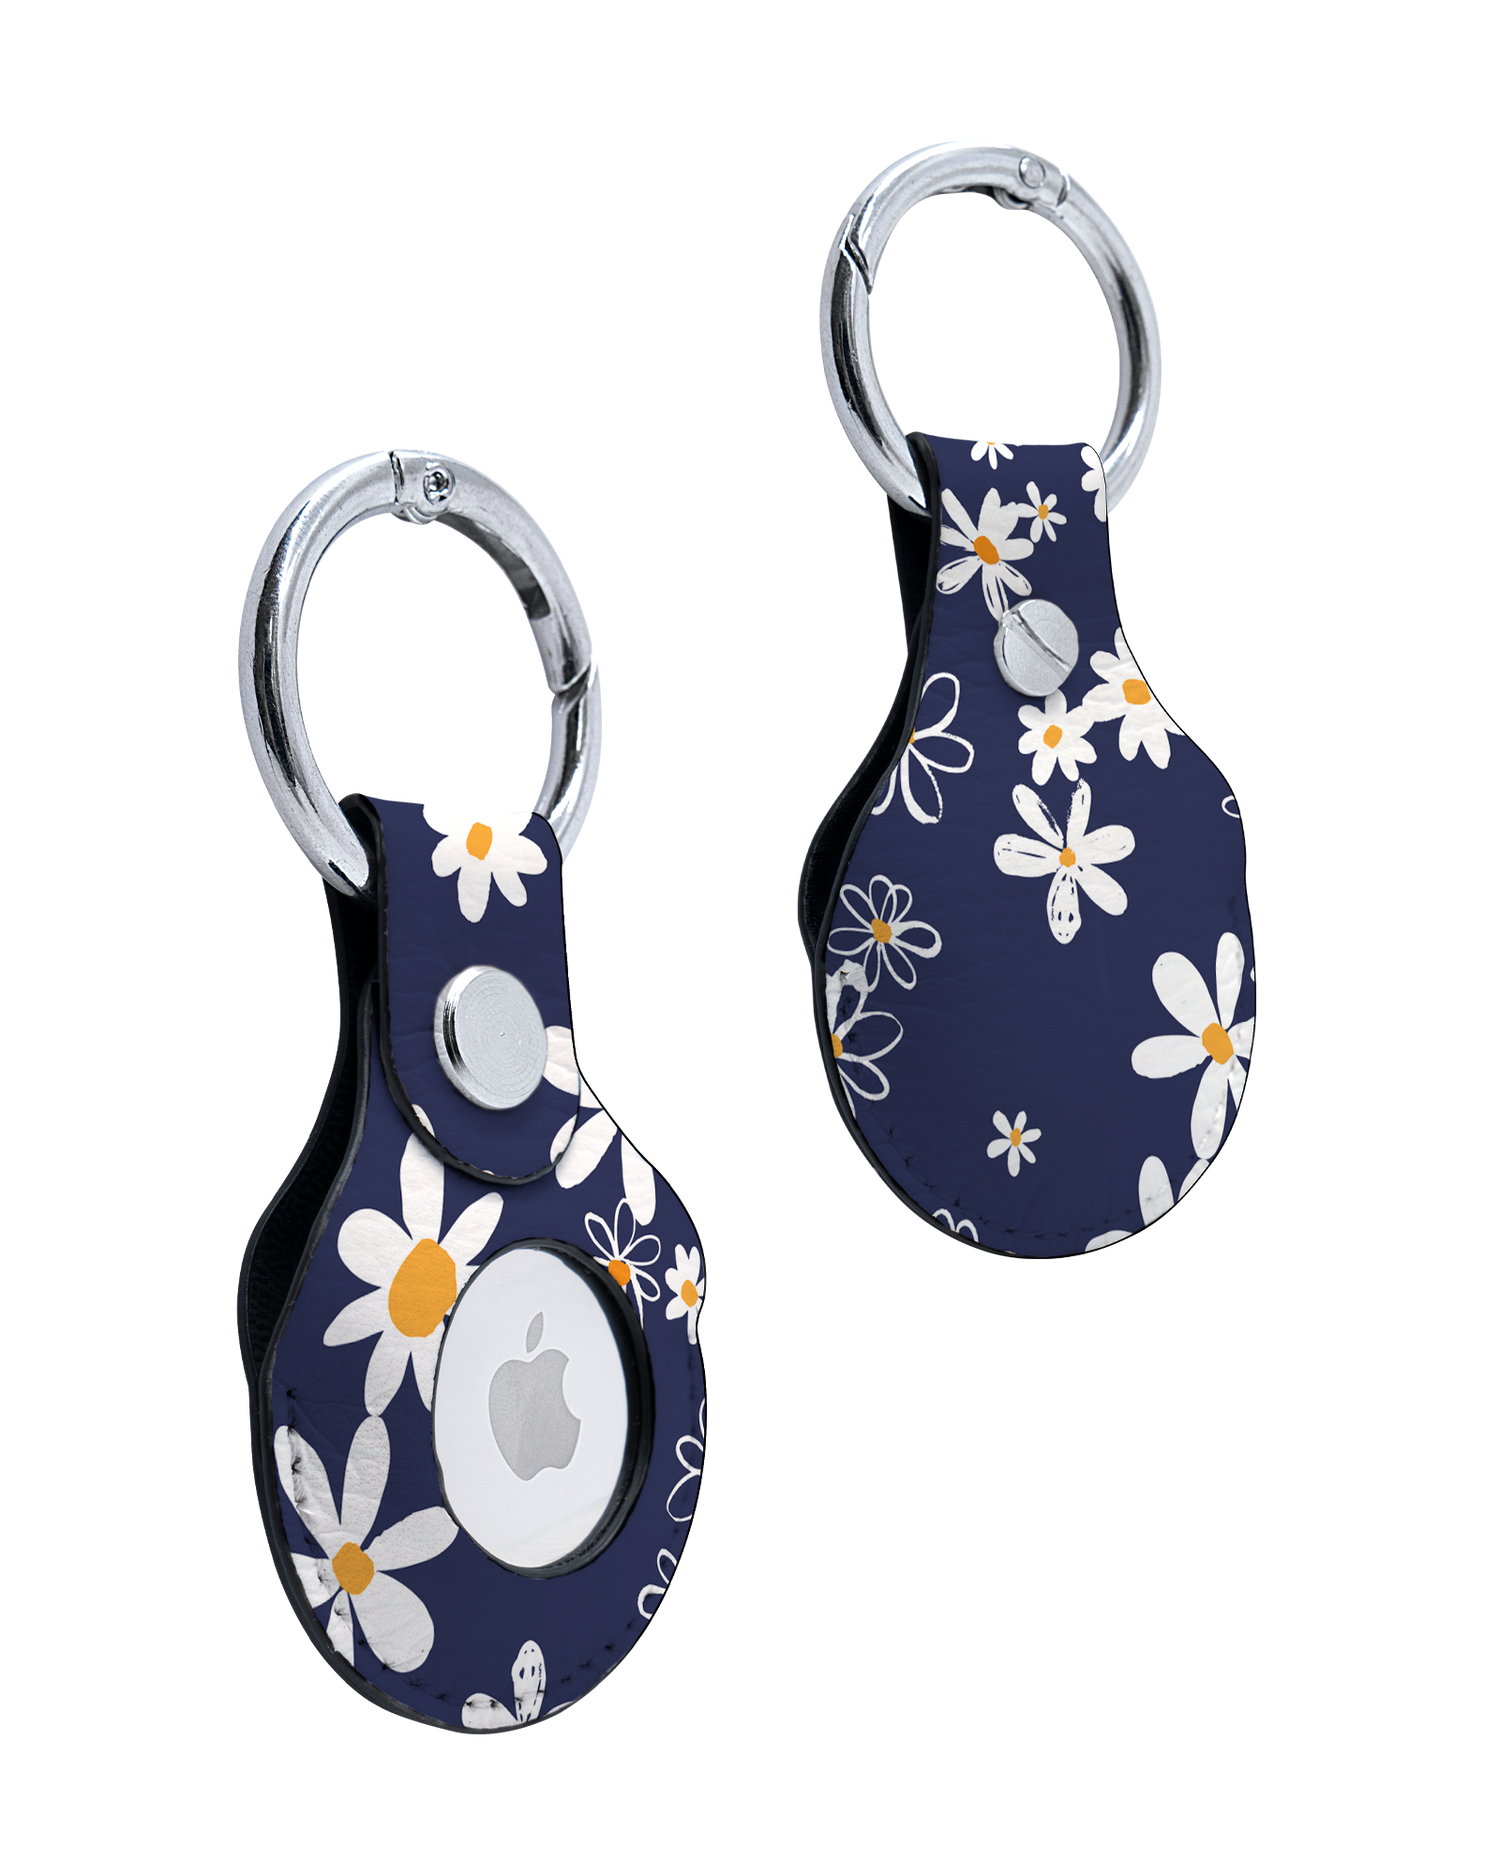 AirTag Holder with Navy Daisies Design: Front and Back